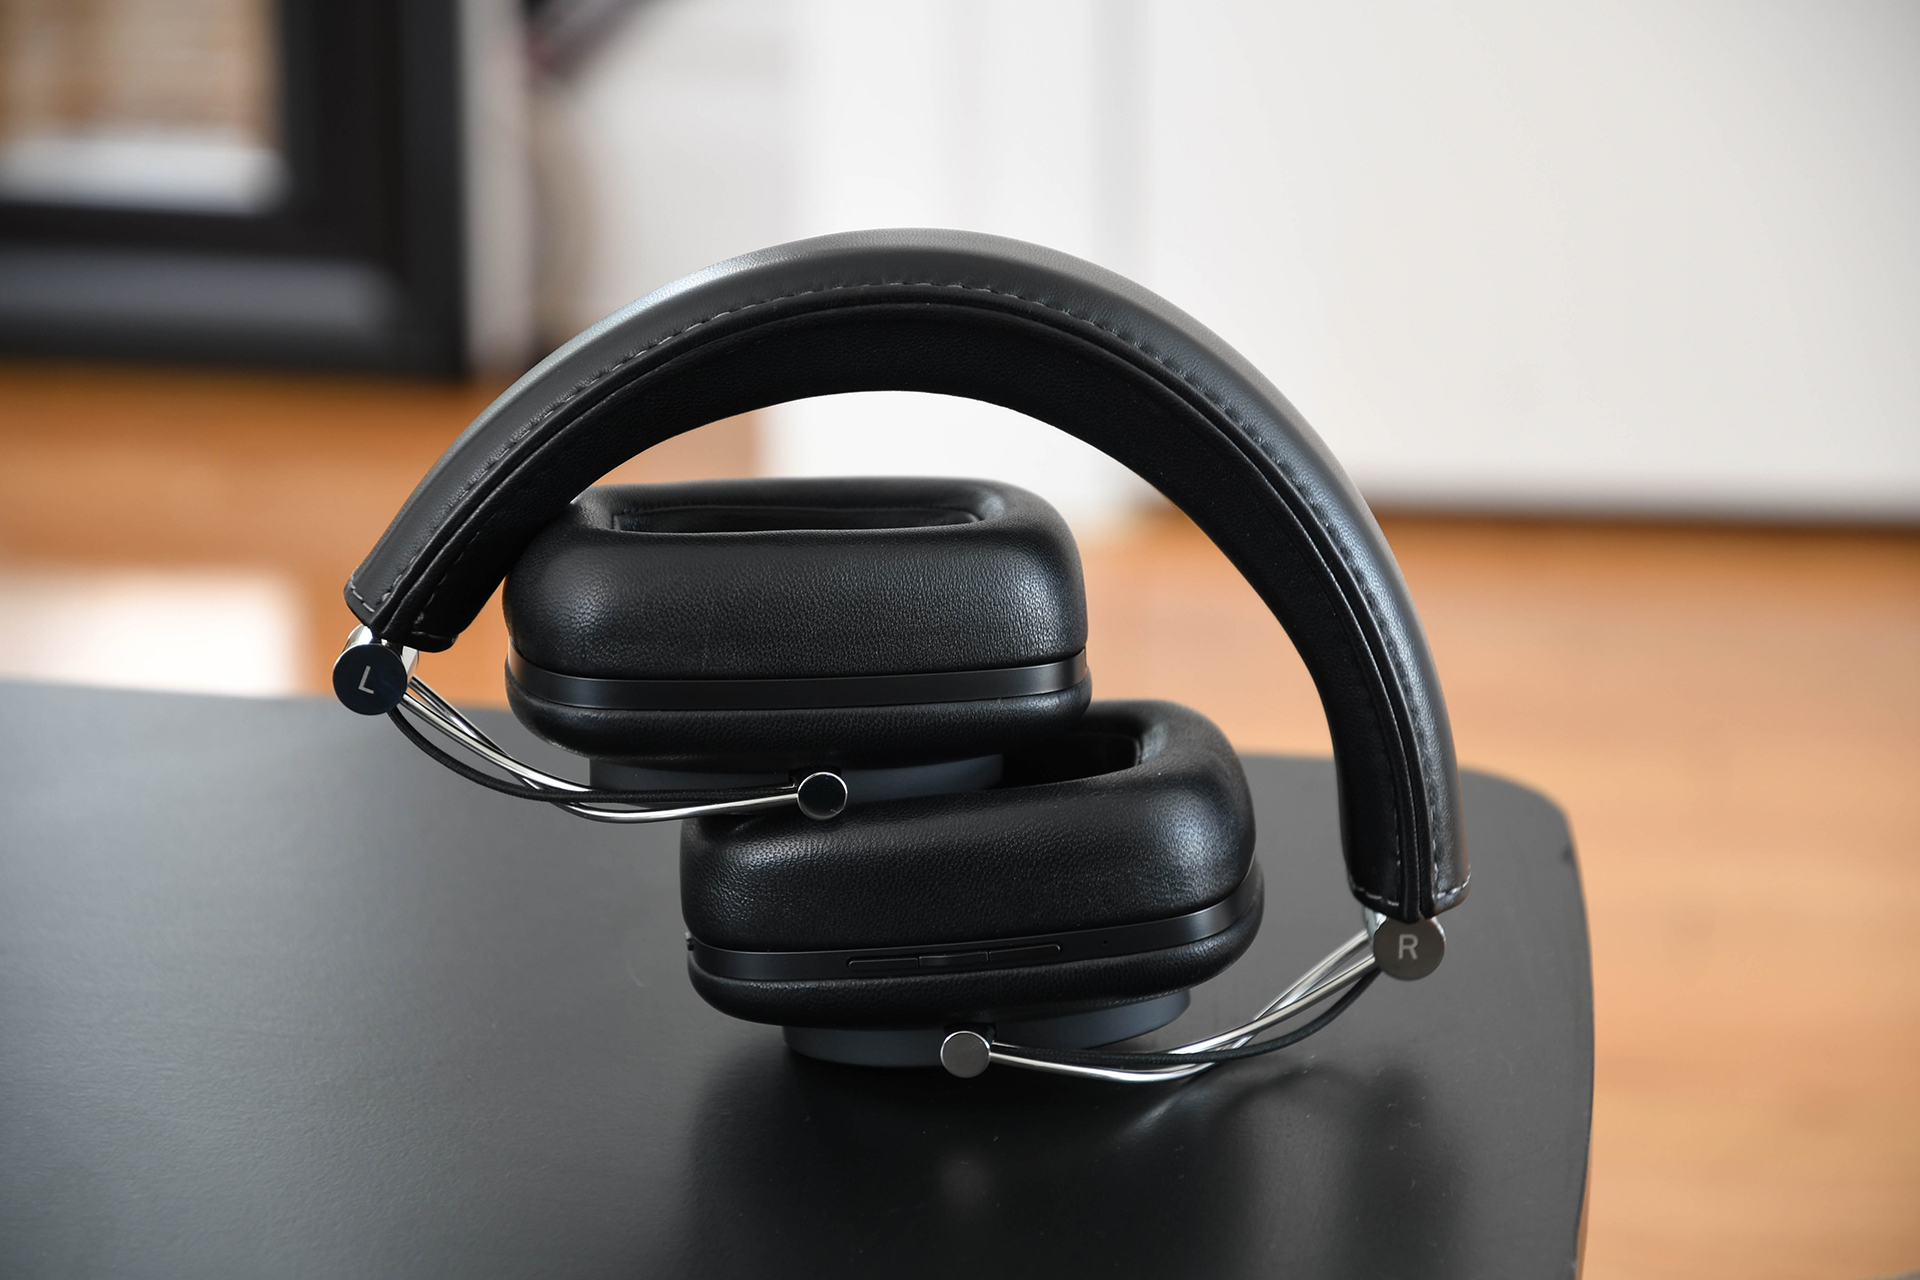 Bowers wilkins p7. Bowers & Wilkins p7 Wireless. Bowers and Wilkins p7 Wireless Headphones. Наушники Bowers & Wilkins p7 Wireless. Bowers Wilkins p7 s2.